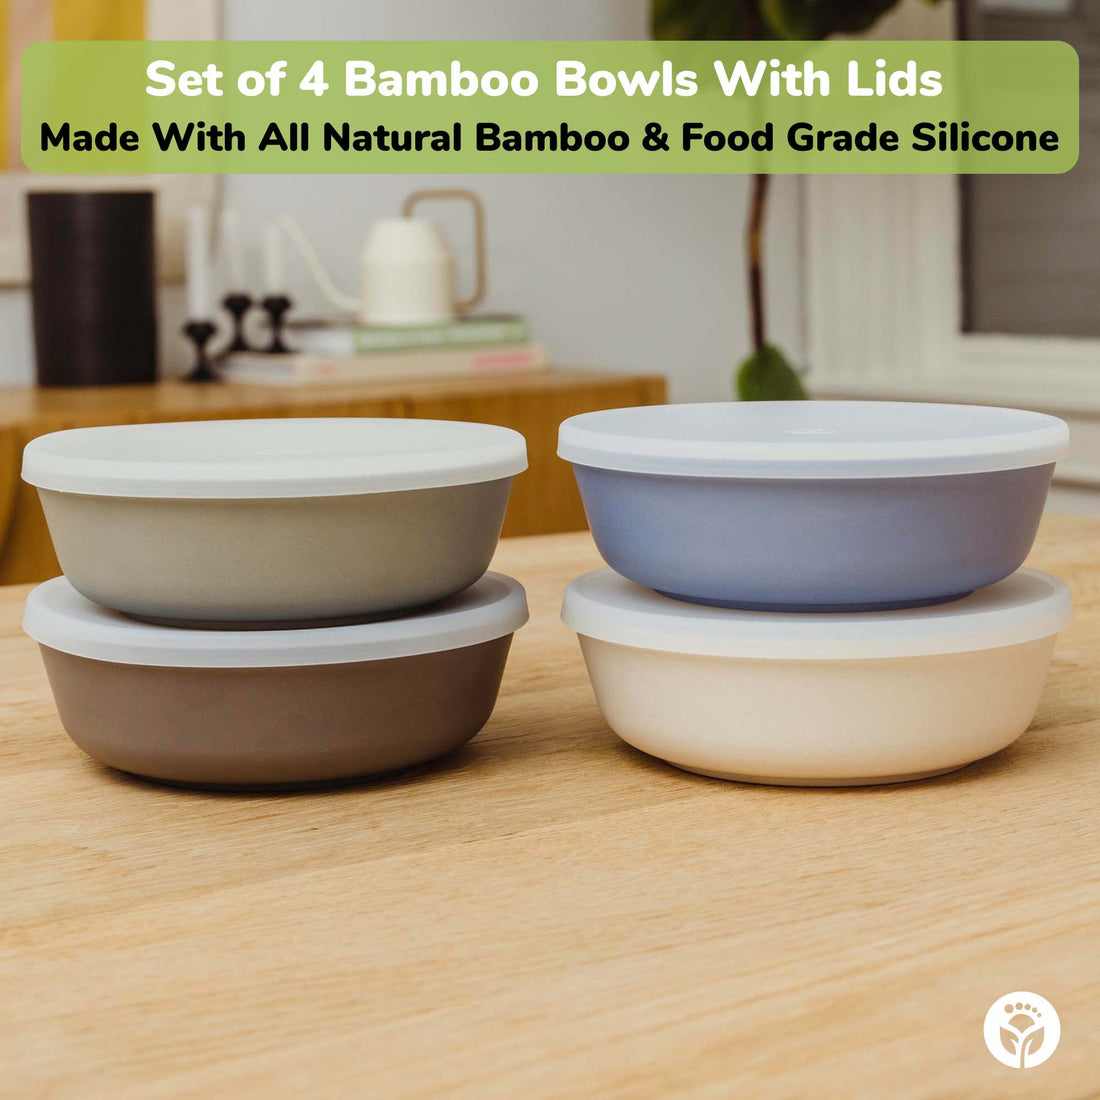  WeeSprout Bamboo Kids Bowls, Set of Four 10 oz Kid-Sized Bamboo  Bowls, Dishwasher Safe Kid Bowls (Blue, Green, Gray, & Beige): Home &  Kitchen